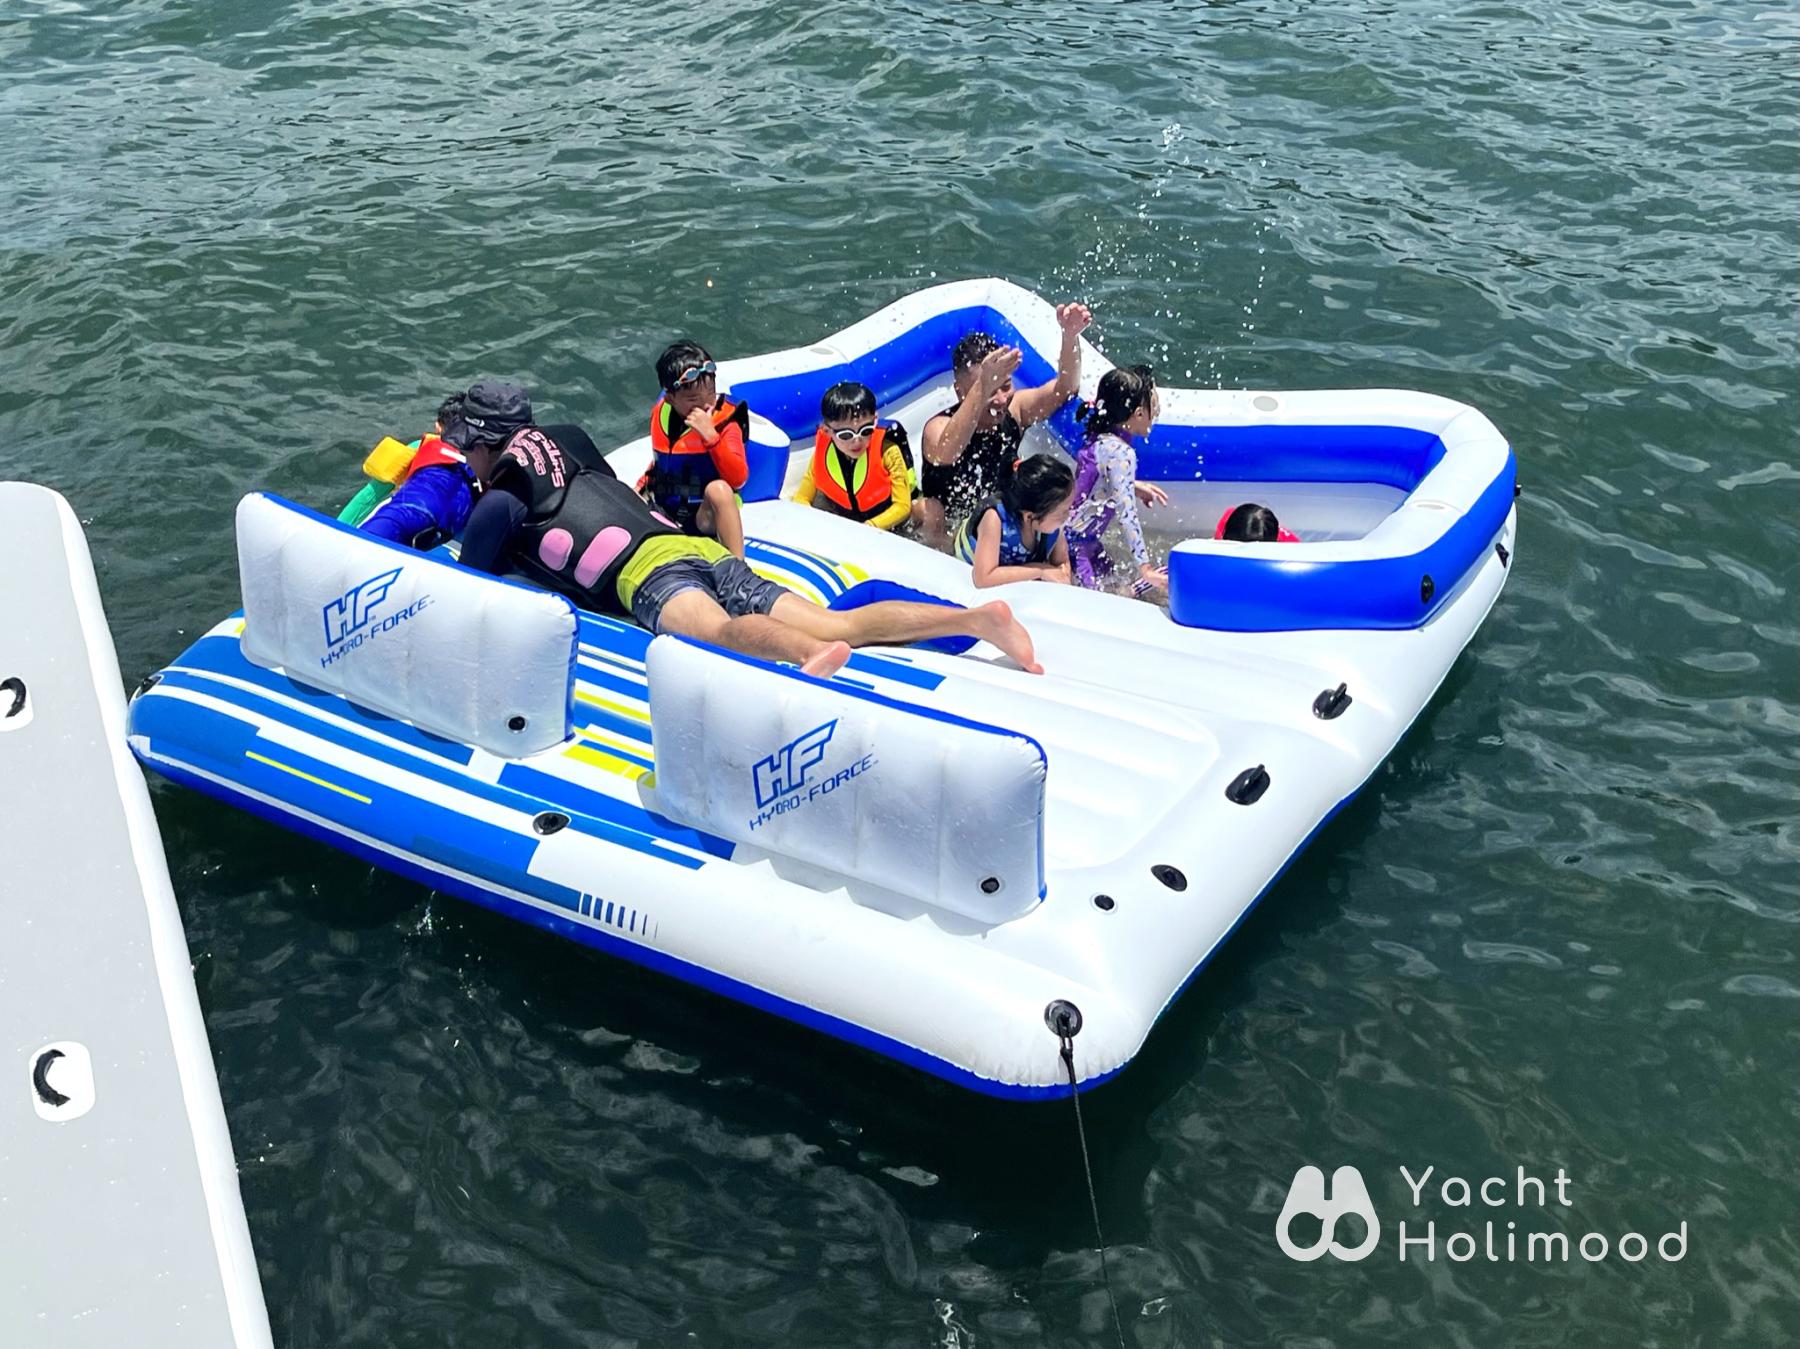 JW01 *The first choice for parents and children (equipped with life jackets and game equipment for children aged 3~12) feature Sai Kung Spacious House Boat （Swimming Pool & Wakesurfing options ava.) 17